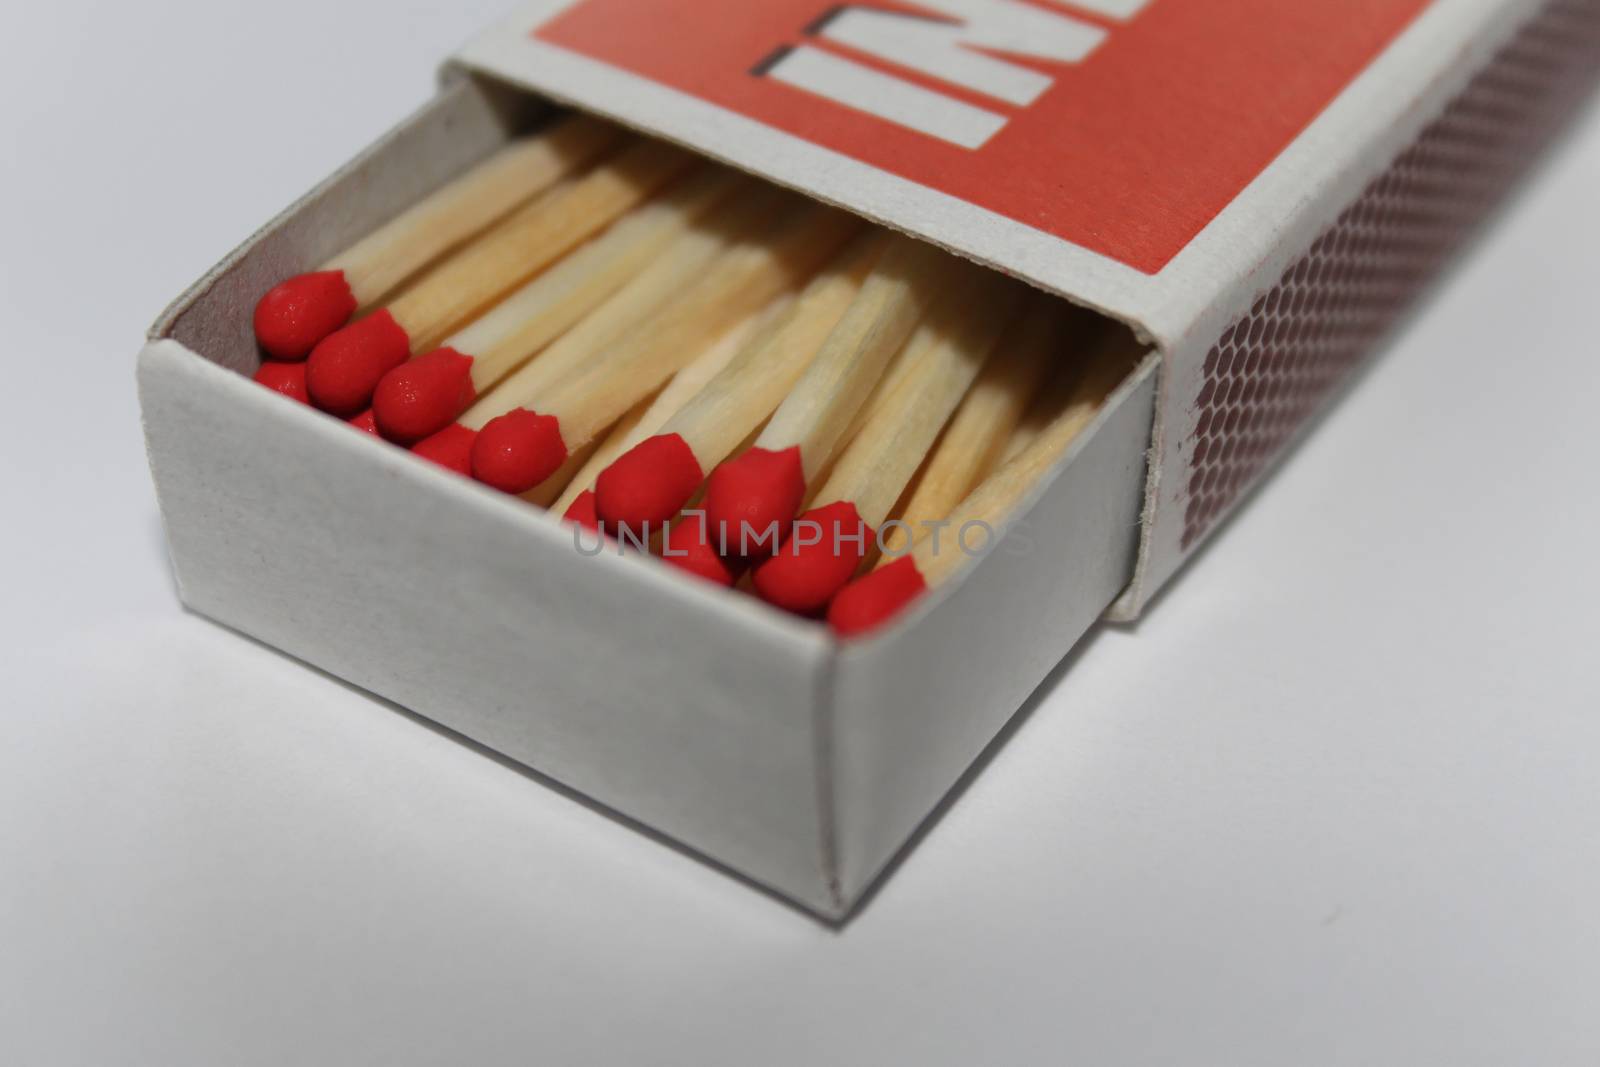 Matches in a box on a white background. by Kasia_Lawrynowicz